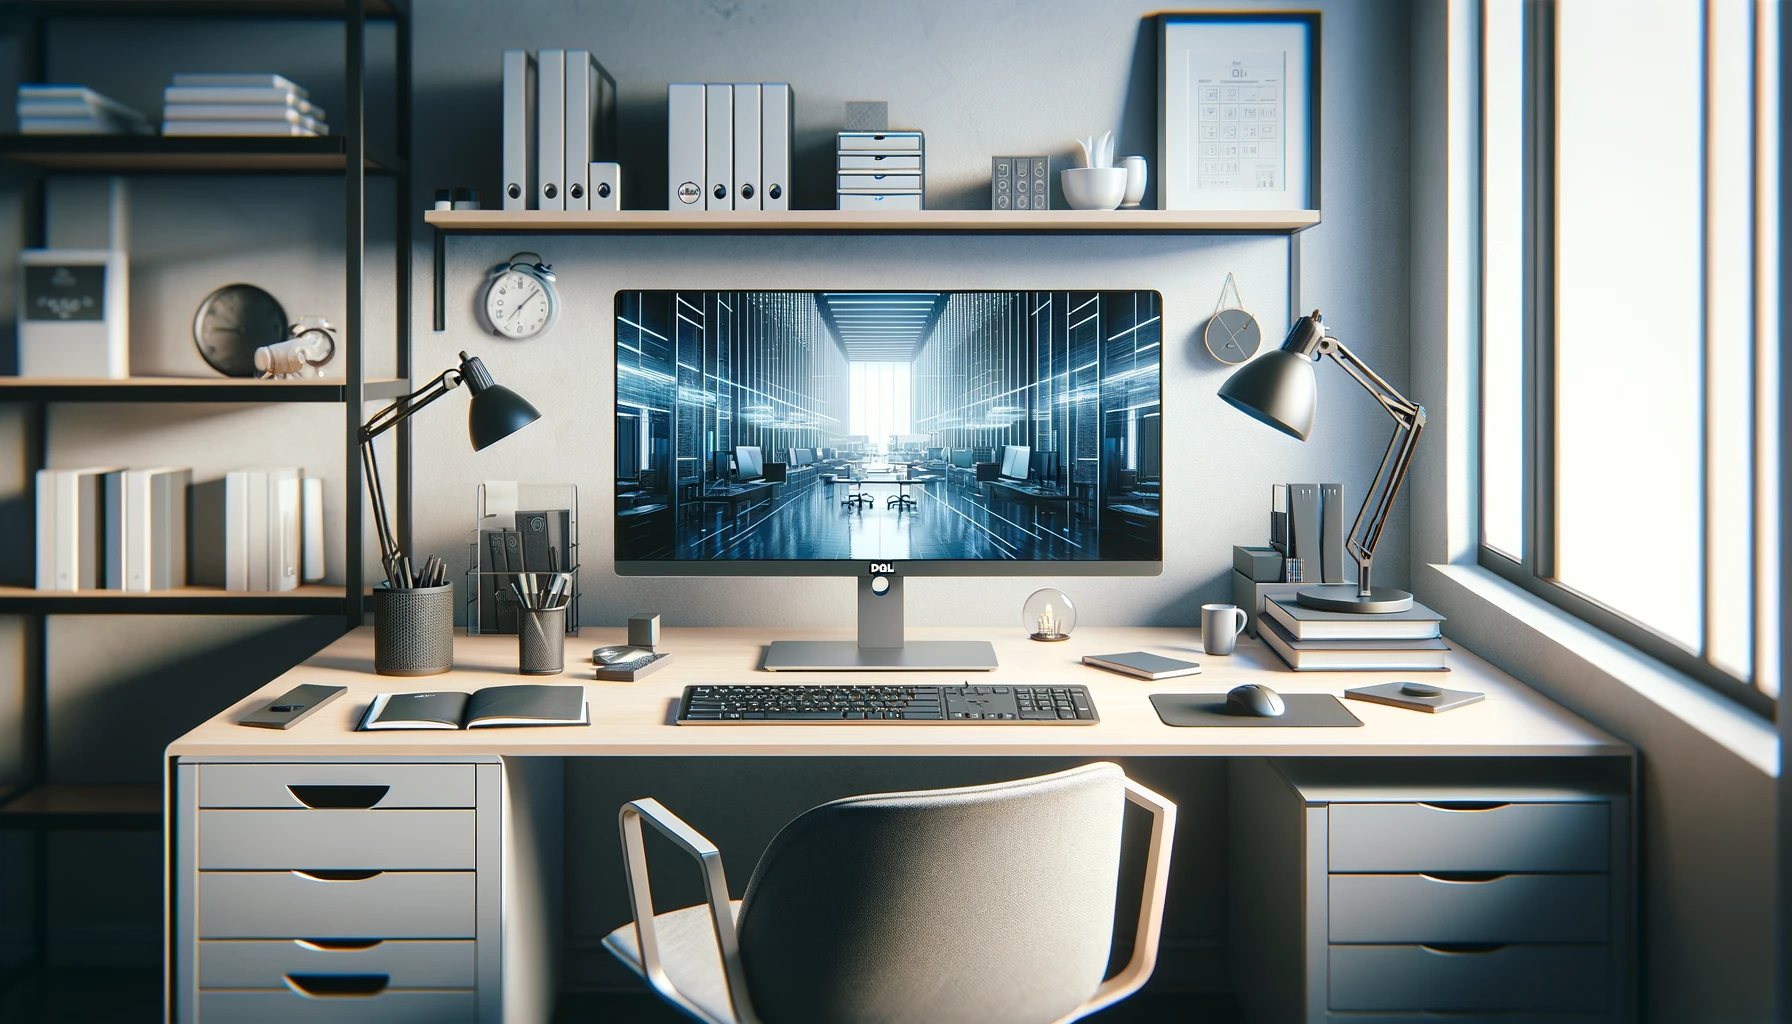 The image showcases a modern office setup featuring a Dell computer, complete with office accessories, emphasizing a productive and professional work environment with a contemporary and minimalistic design.